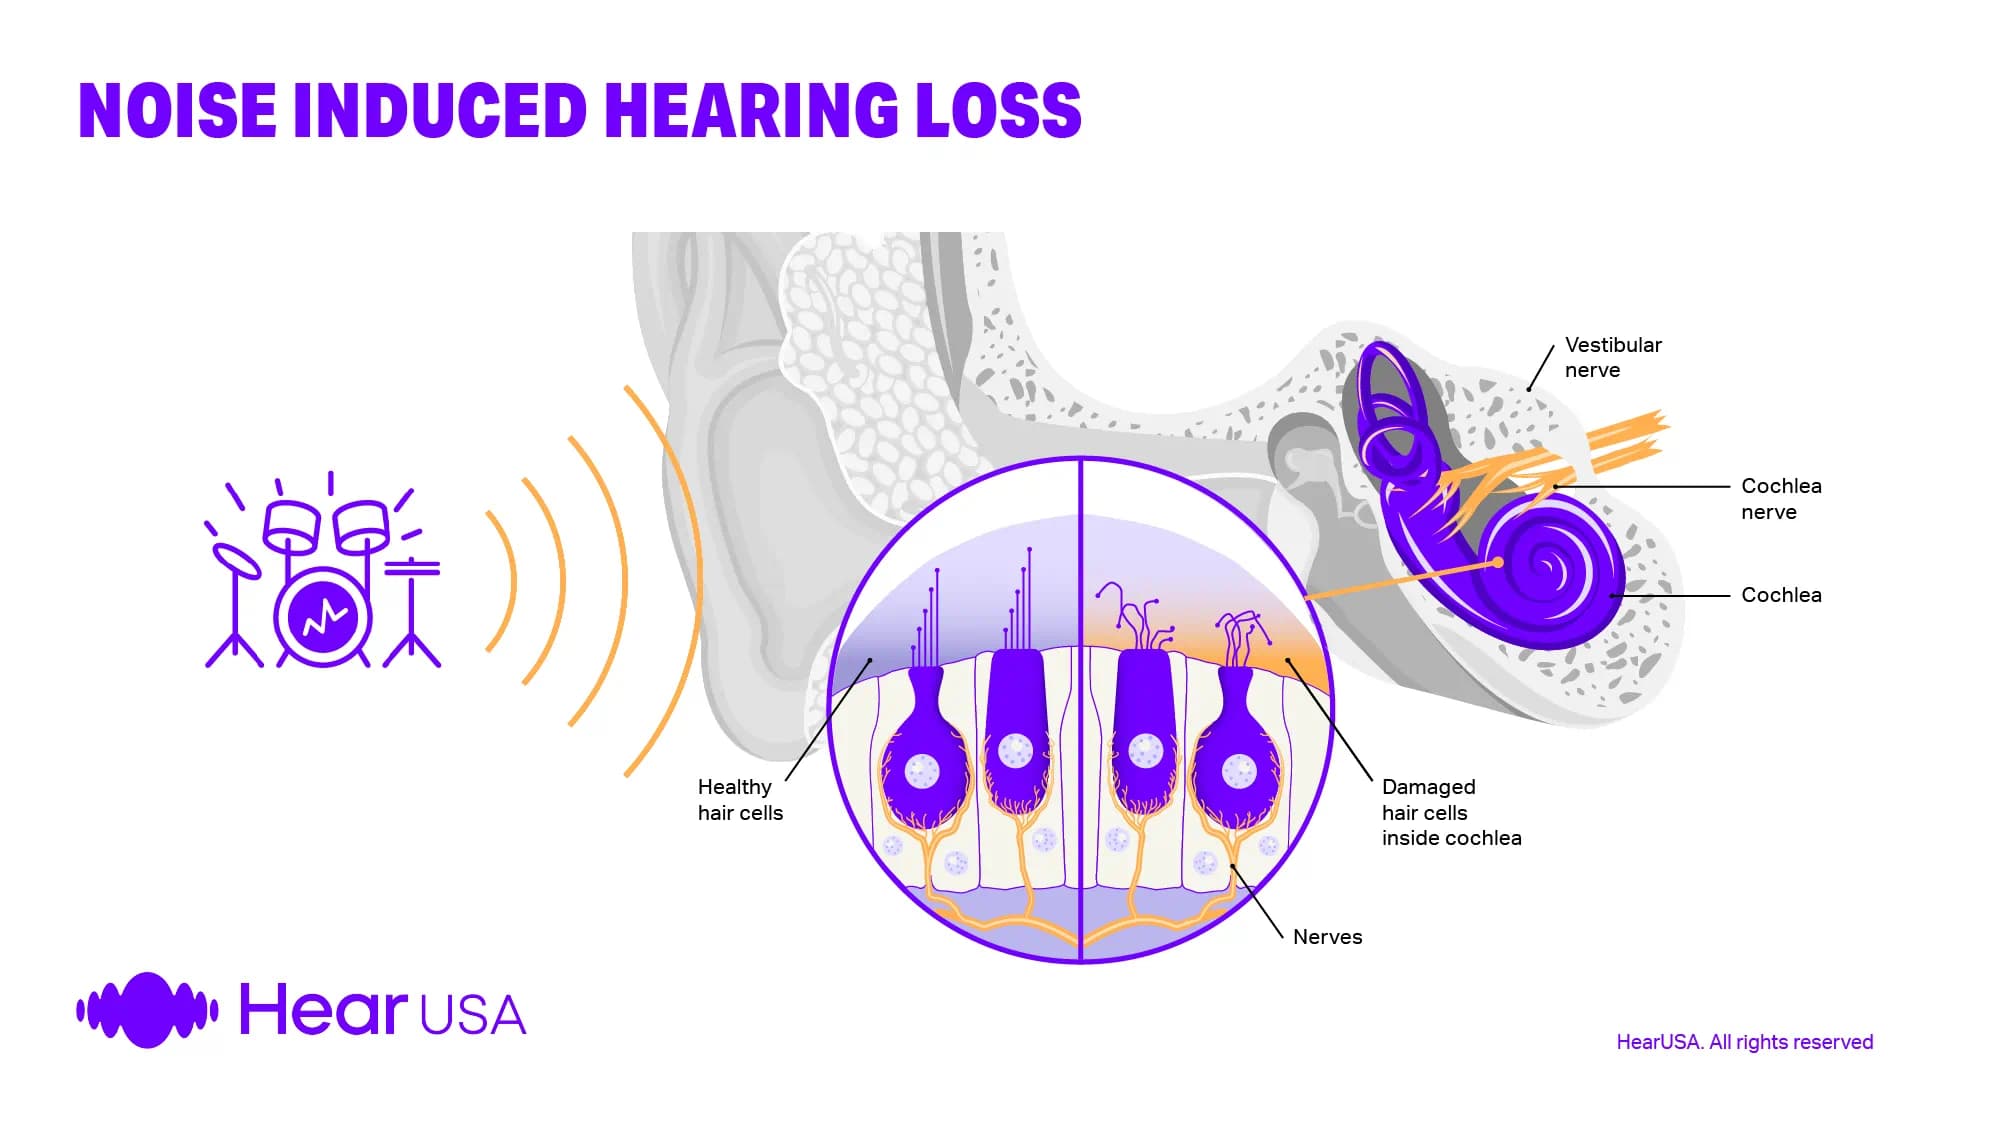 Hearing loss caused by being exposed to noise can be helped by wearing hearing aids